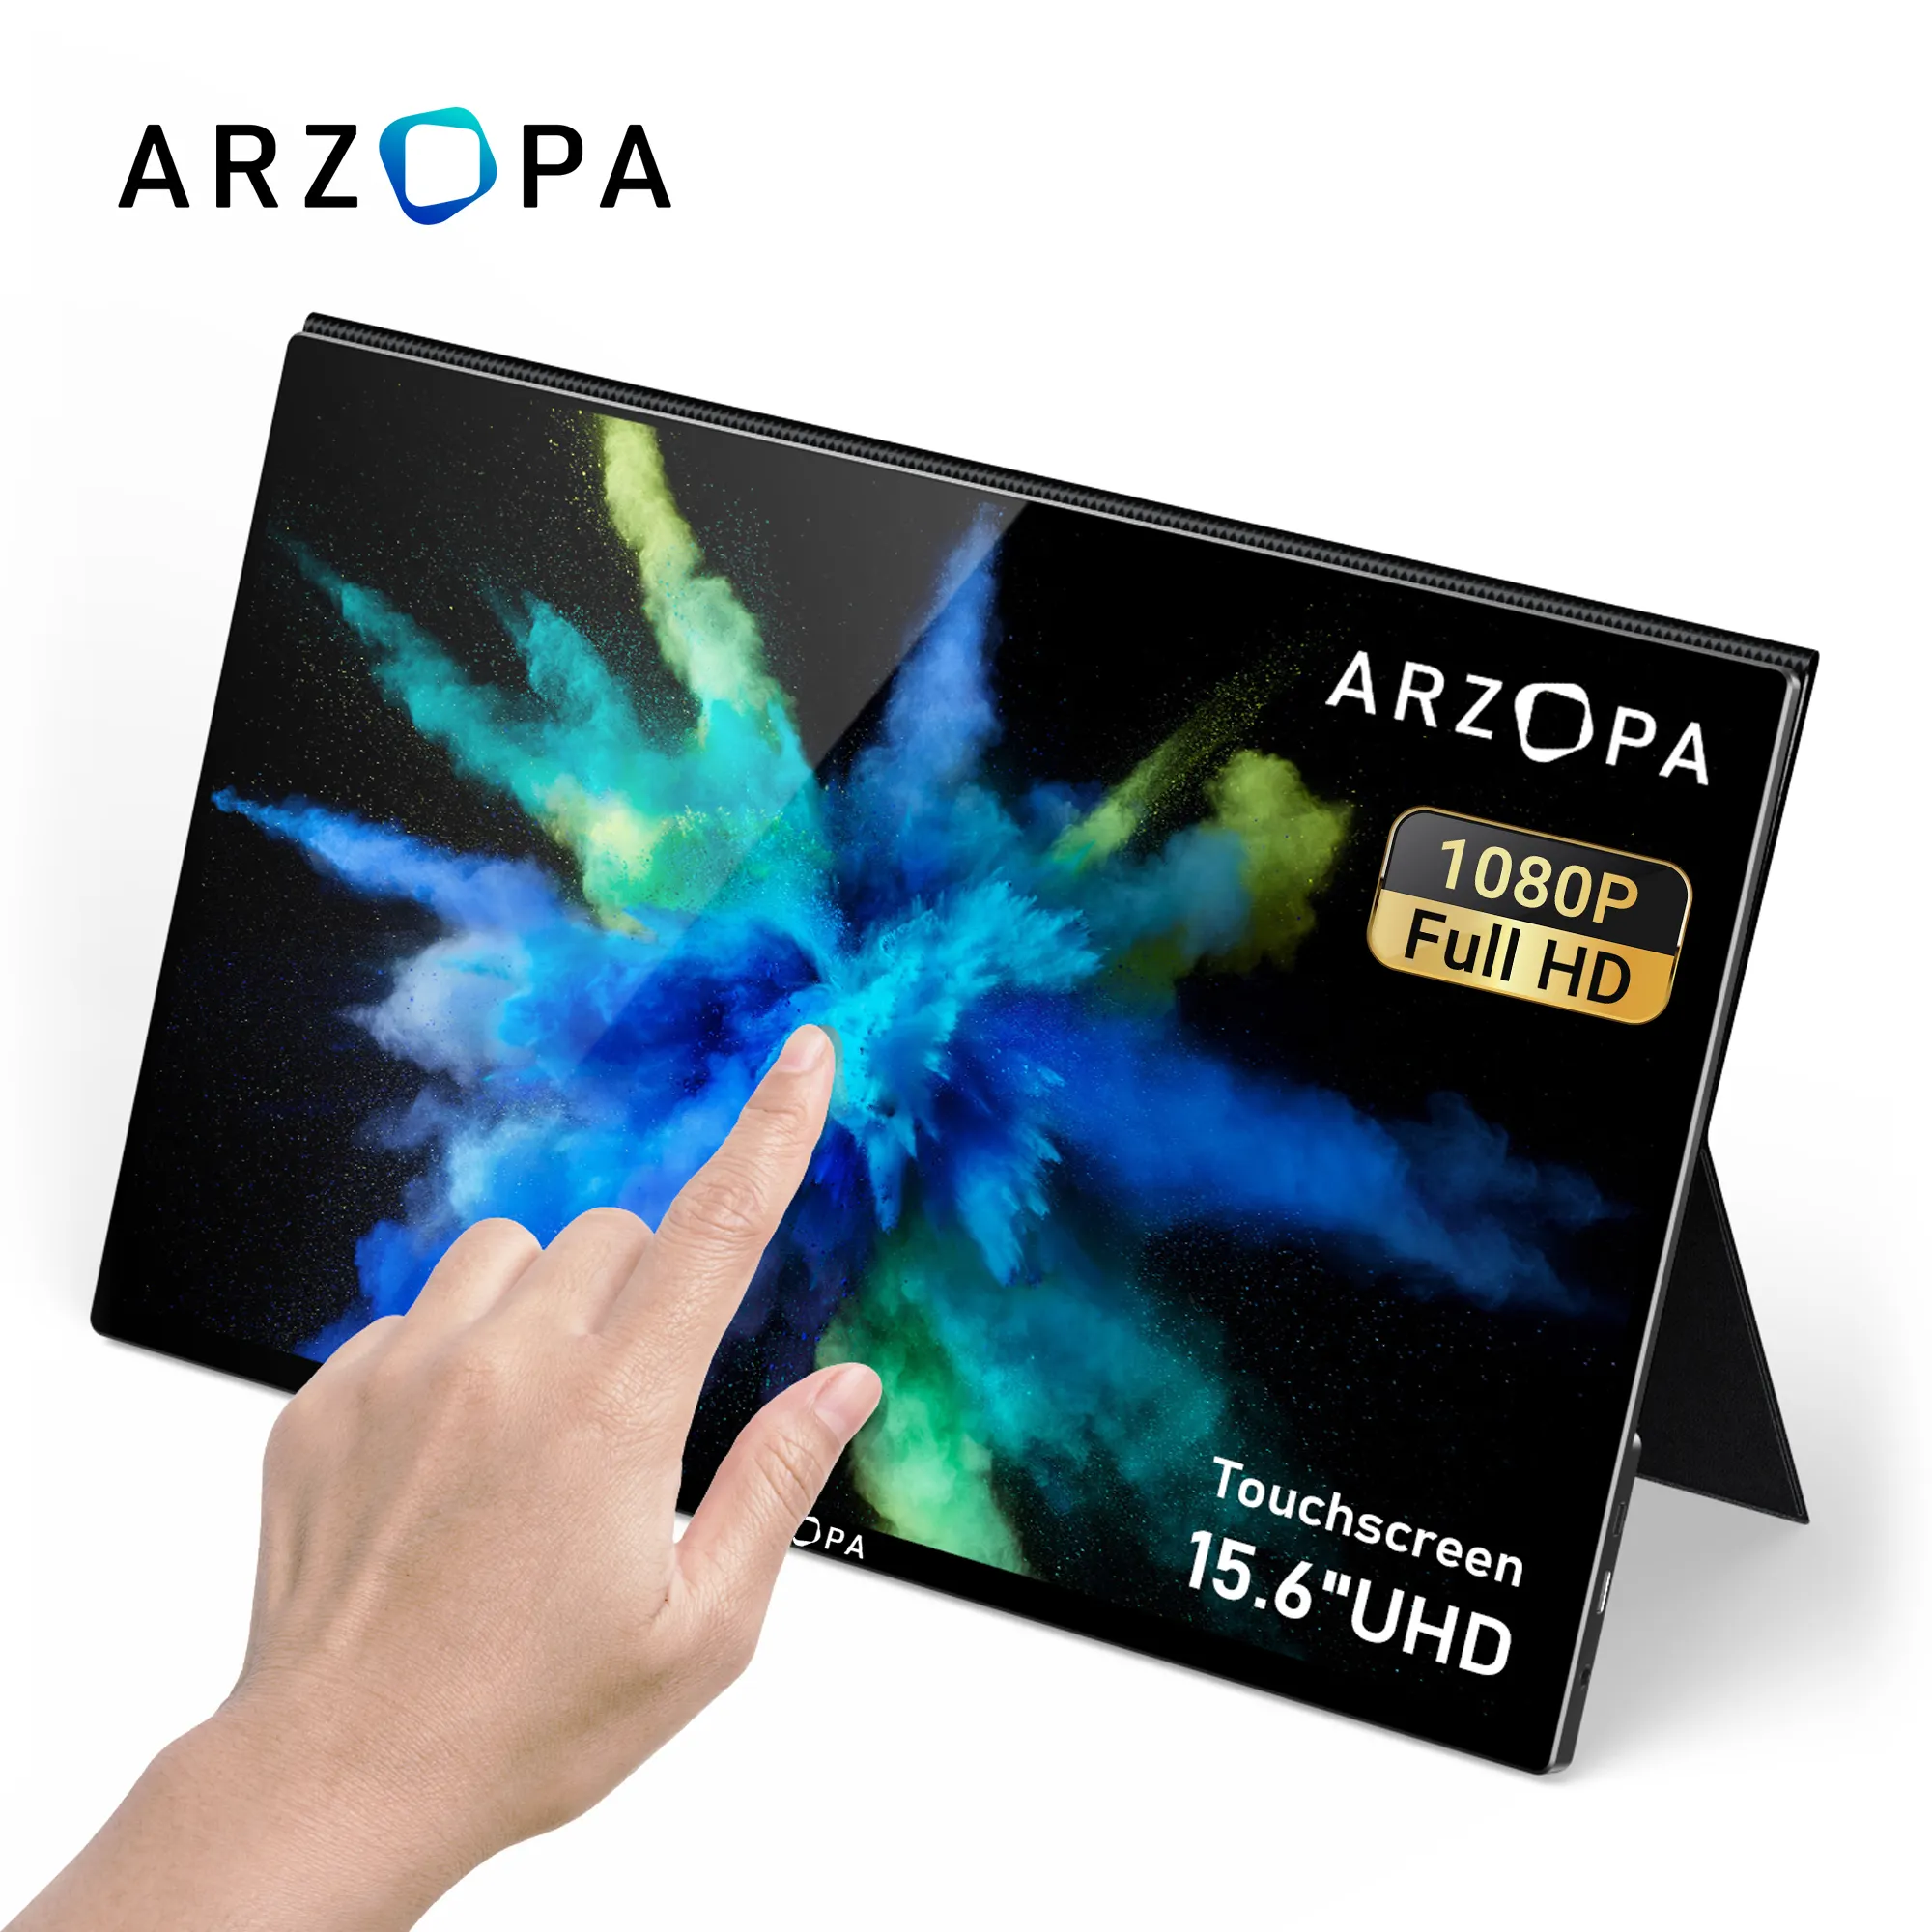 15.6 Inch Triple Display Laptop Gaming Arzopa Portable Touchscreen Monitor for Mobile Phone PS5 Switch